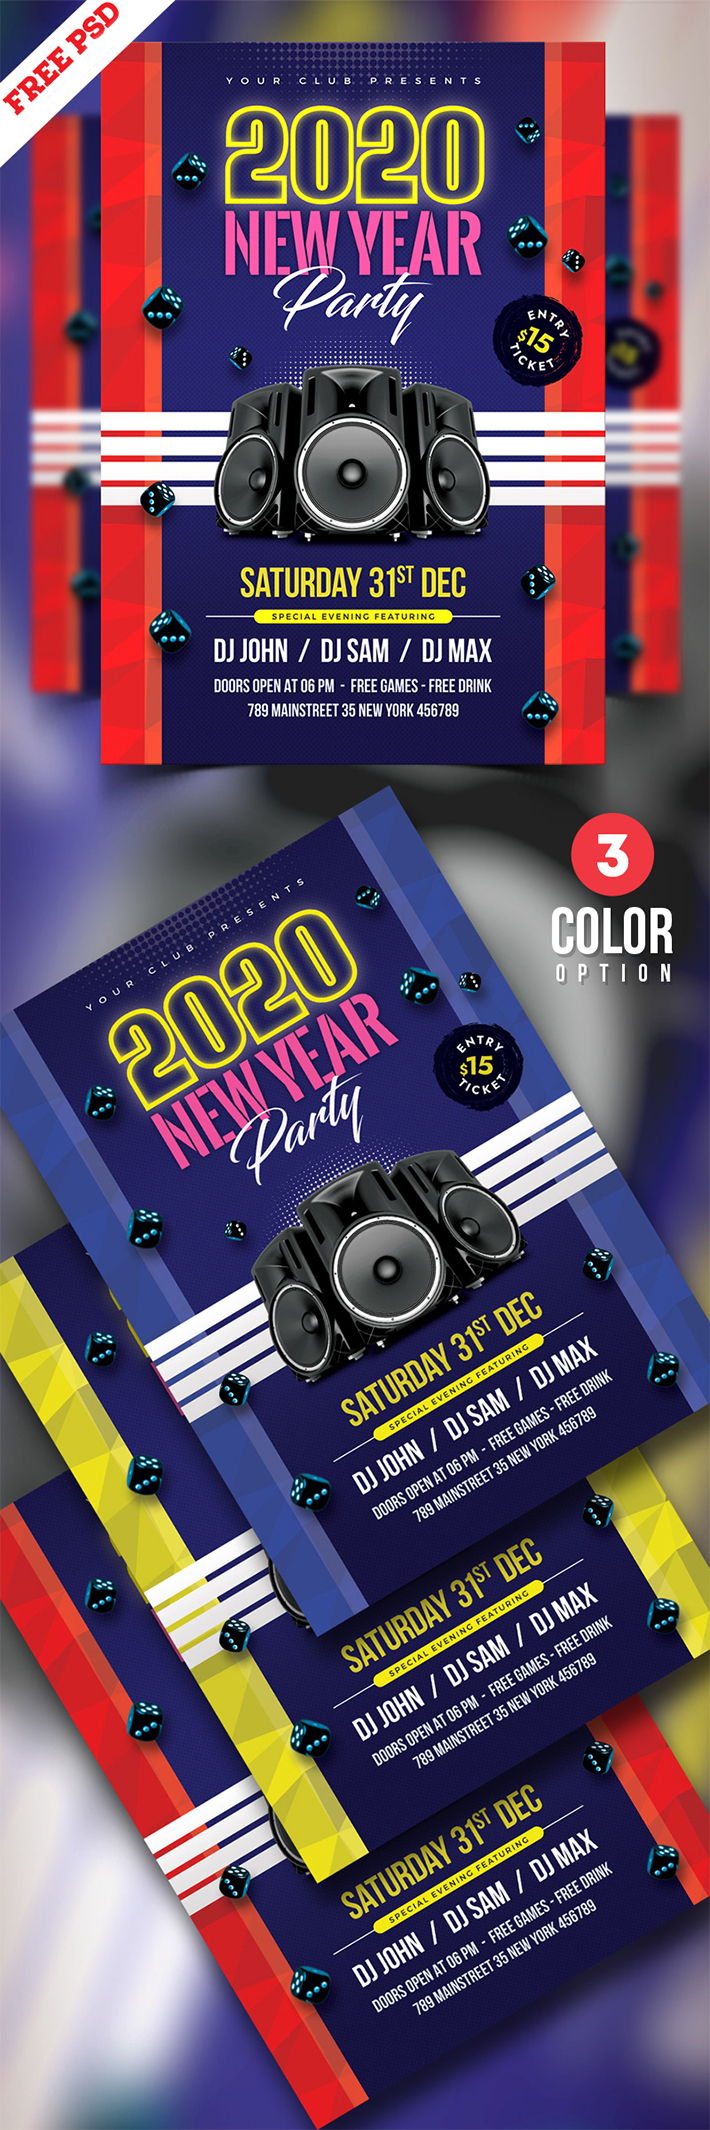 Free Download Elegant New Year Party Flyer PSD Template (2019)